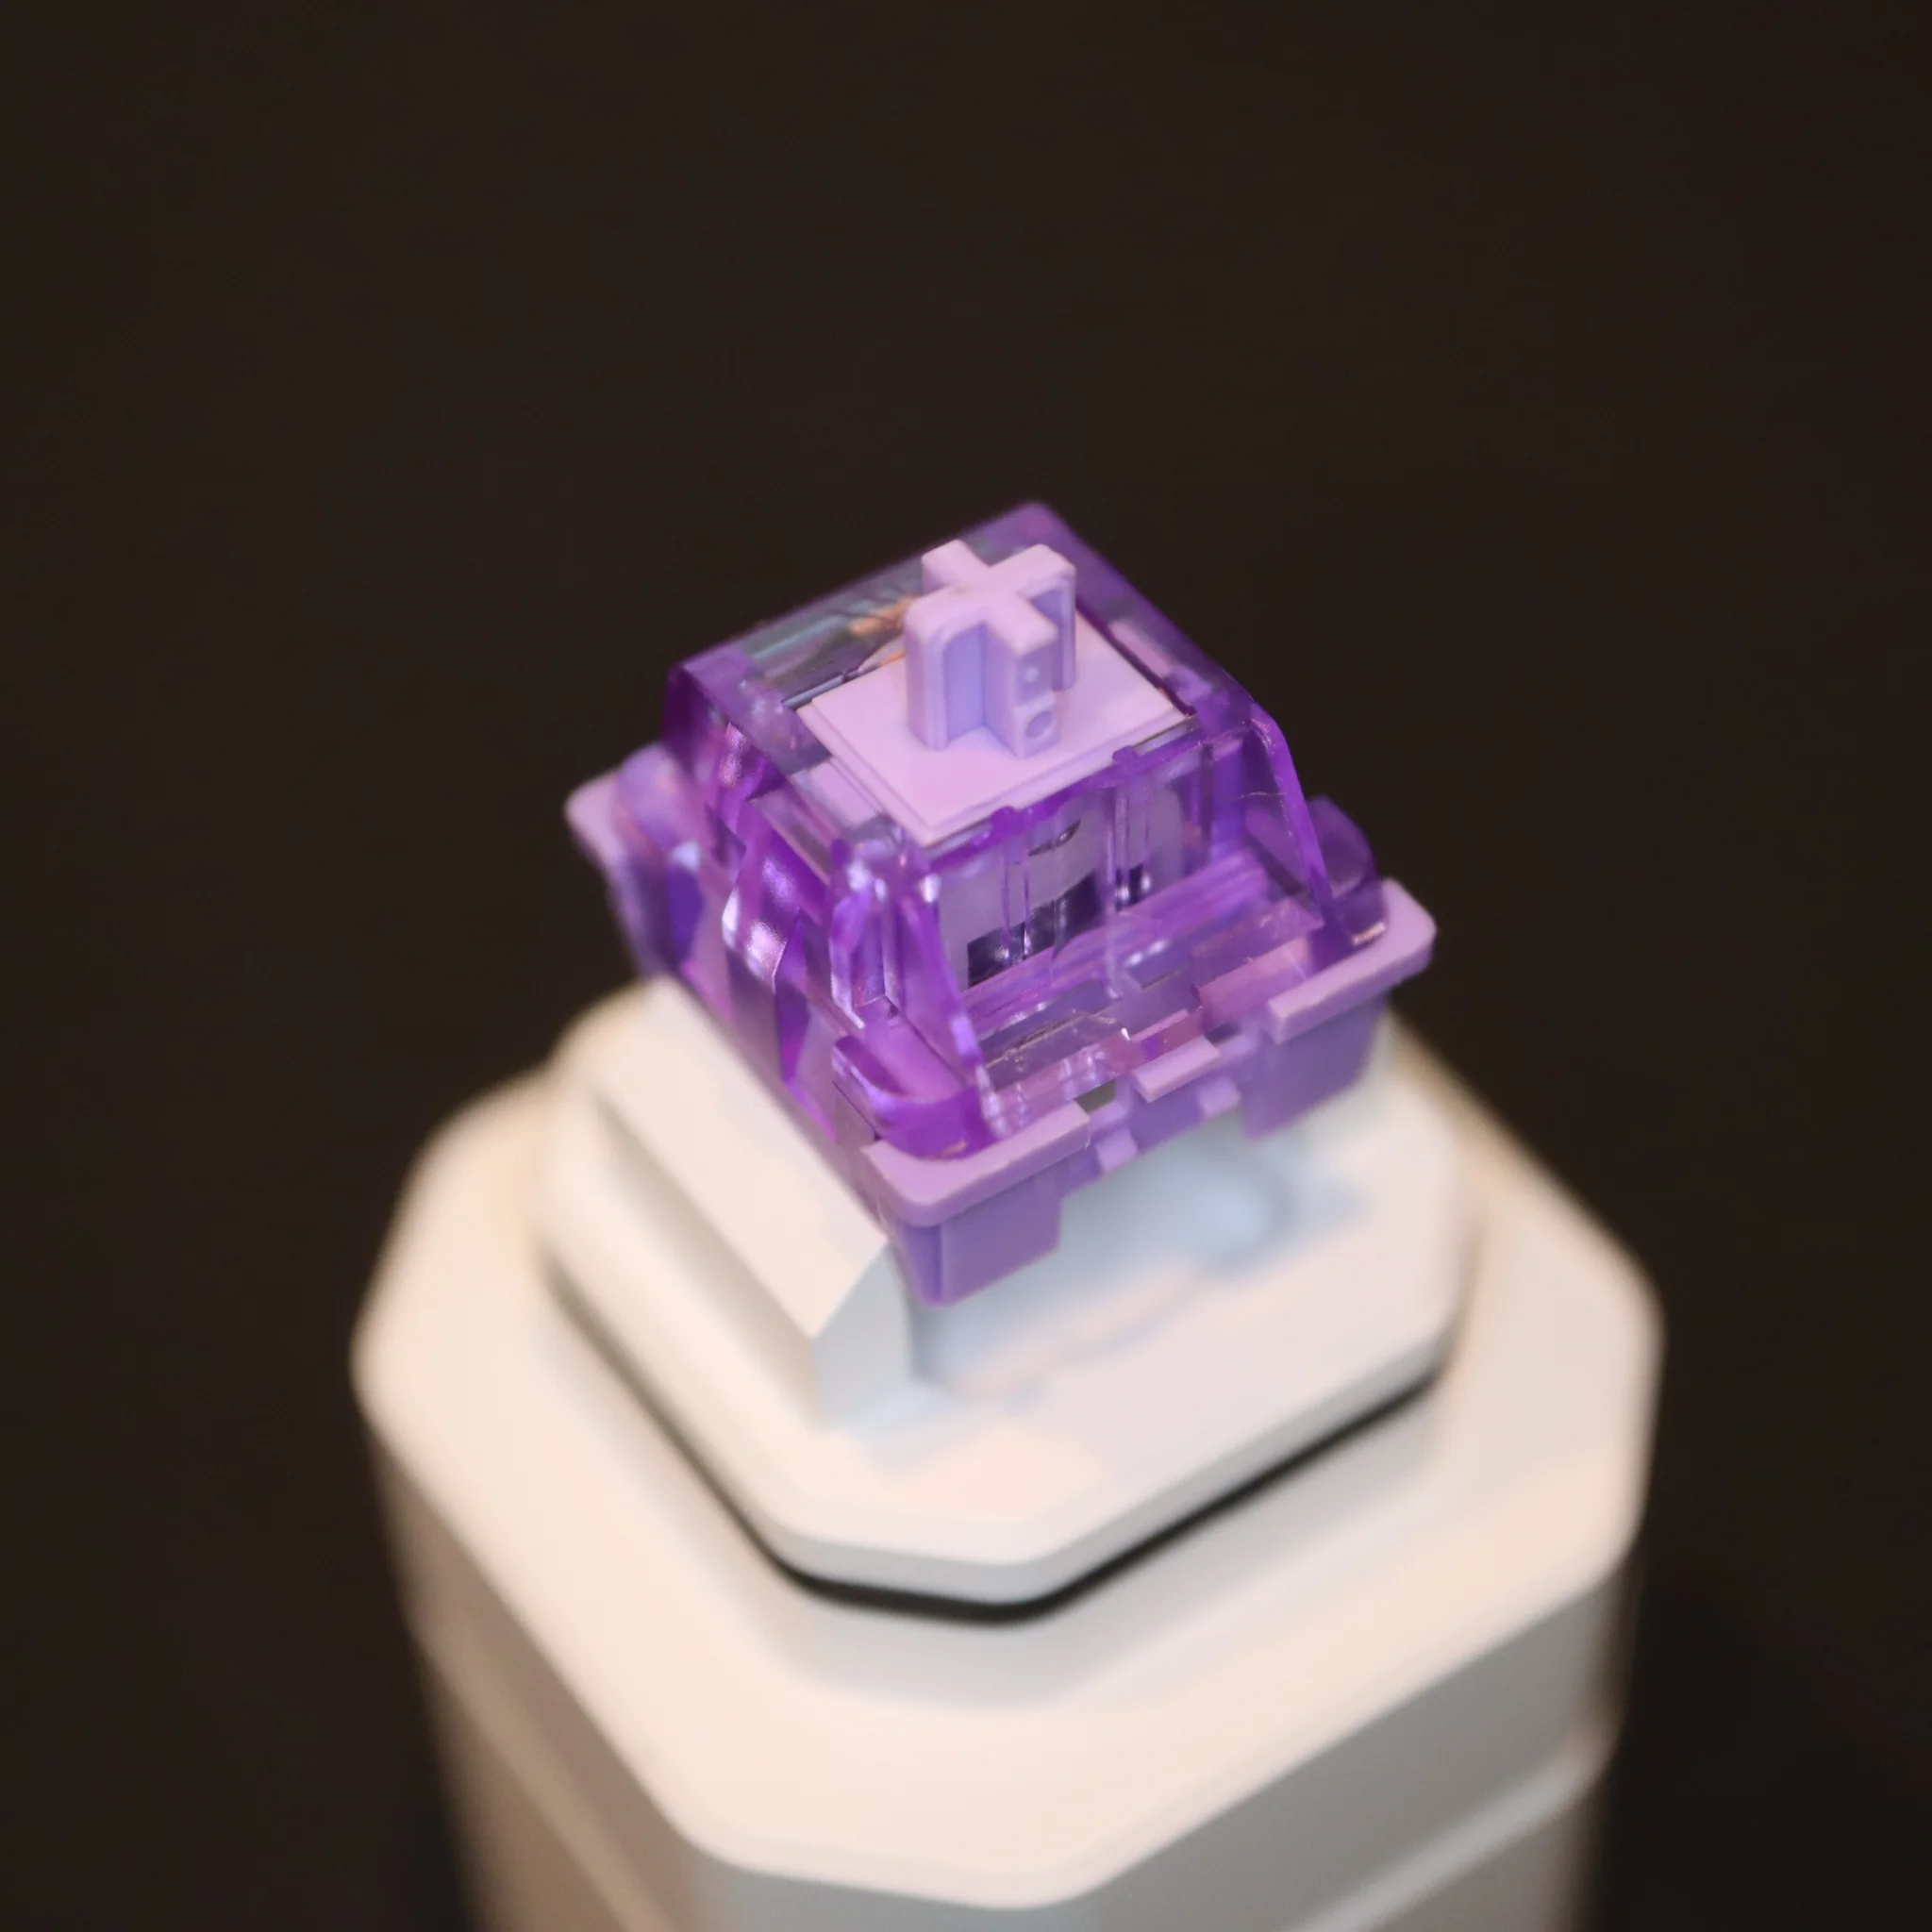 KTT Purple Click Clicky Switches 3PIN x10